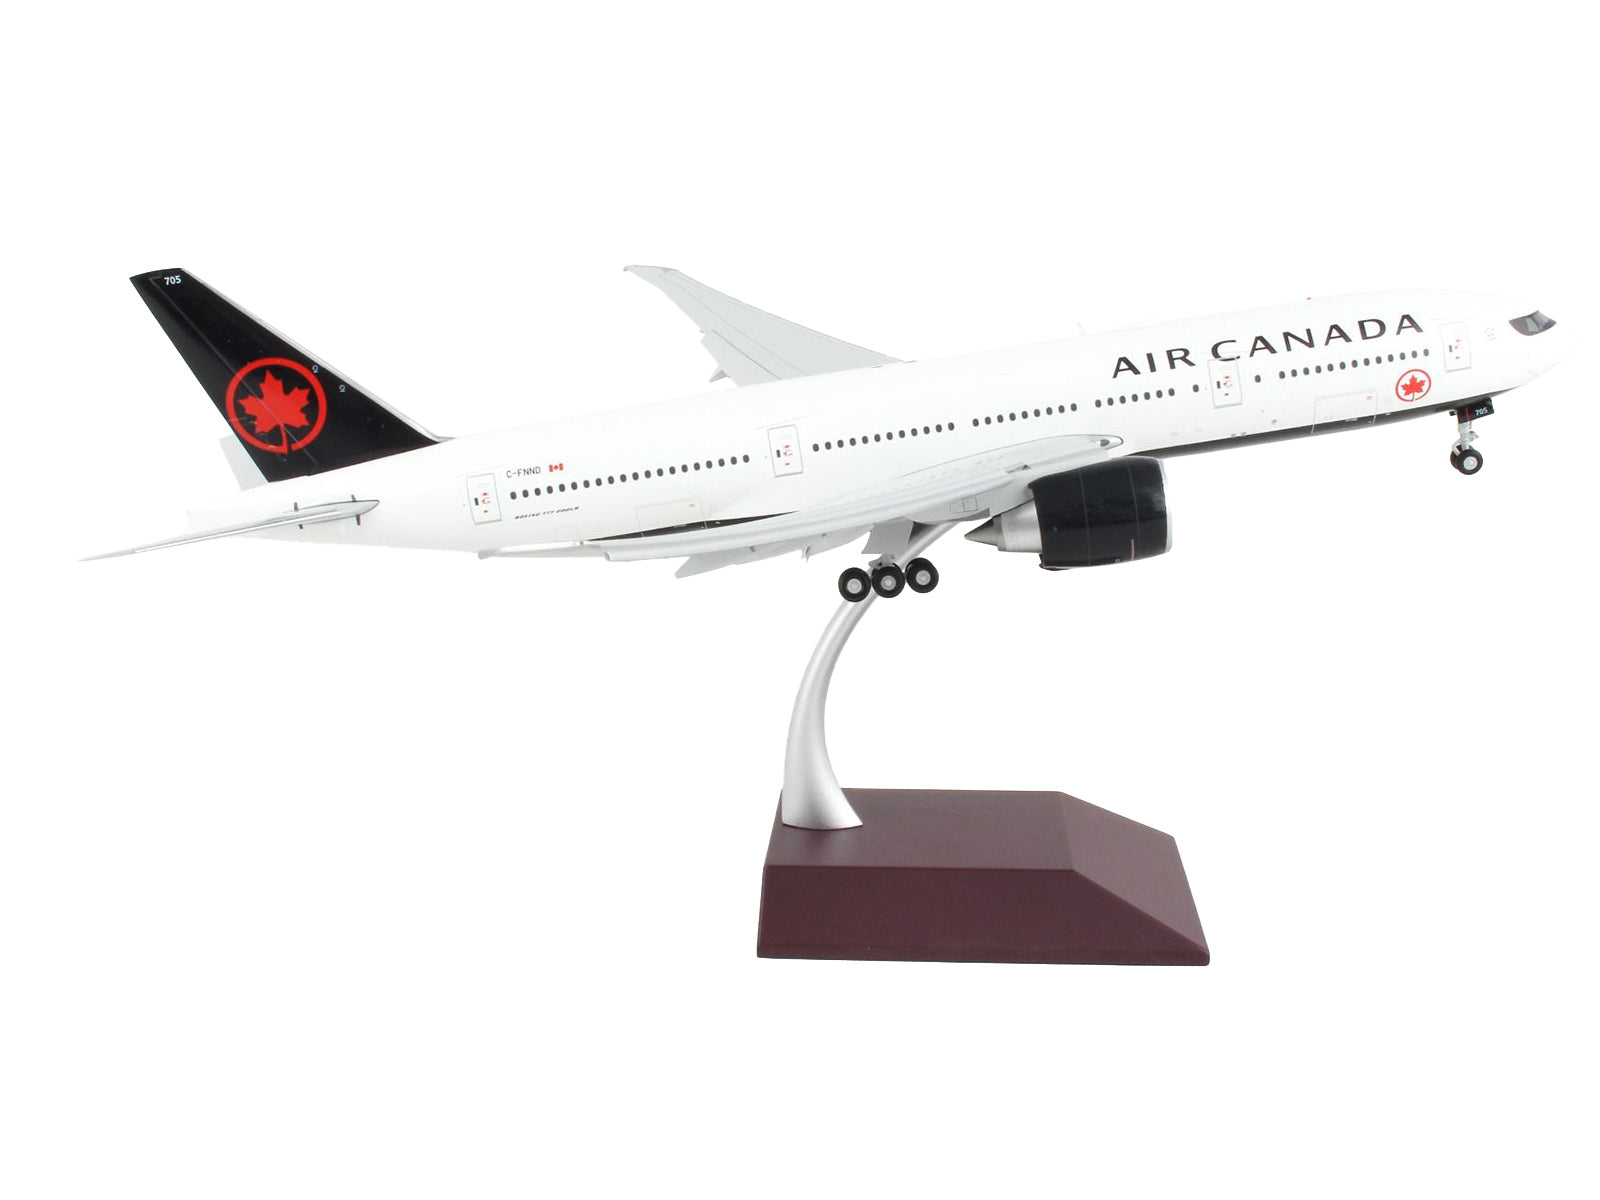 Boeing 777-200LR Commercial Aircraft with Flaps Down "Air Canada" White with Black Tail "Gemini 200" Series 1/200 Diecast Model Airplane by GeminiJets